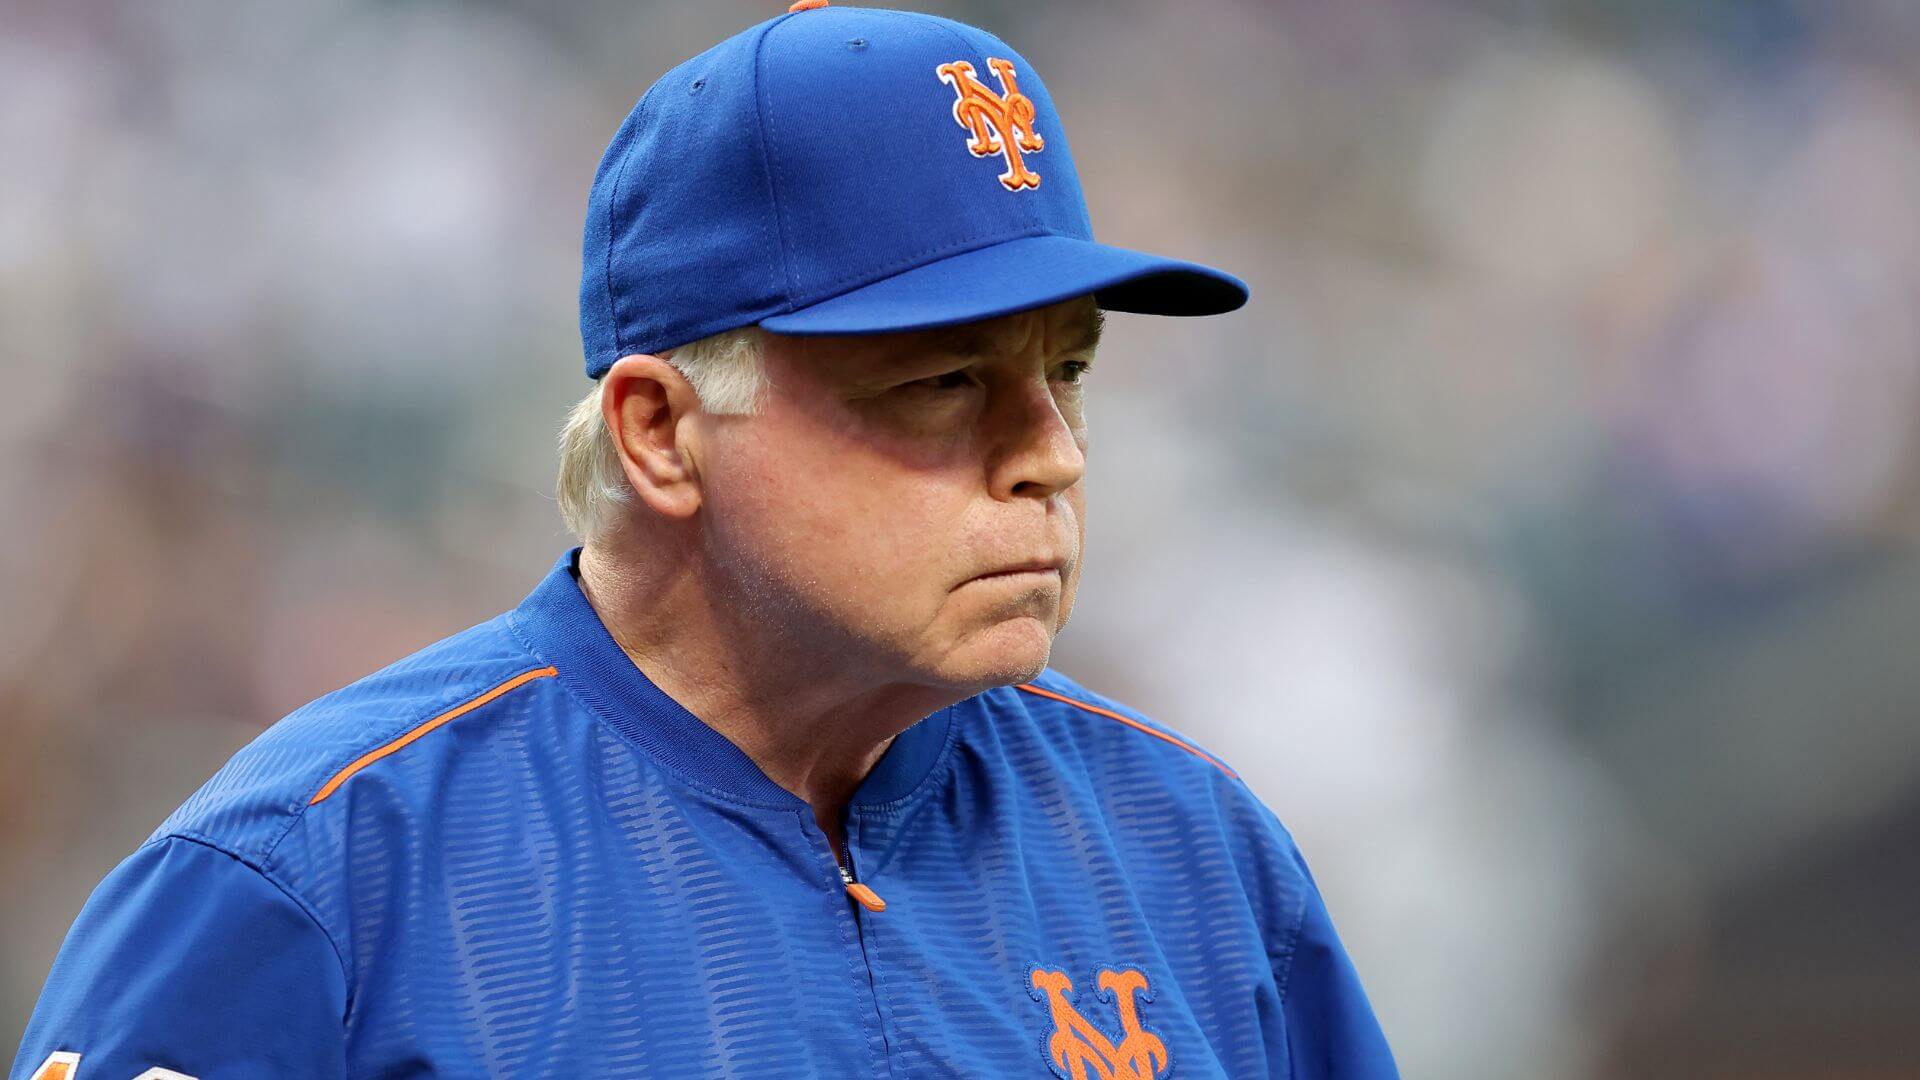 First MLB Manager Fired Odds: The Buck Stops Here